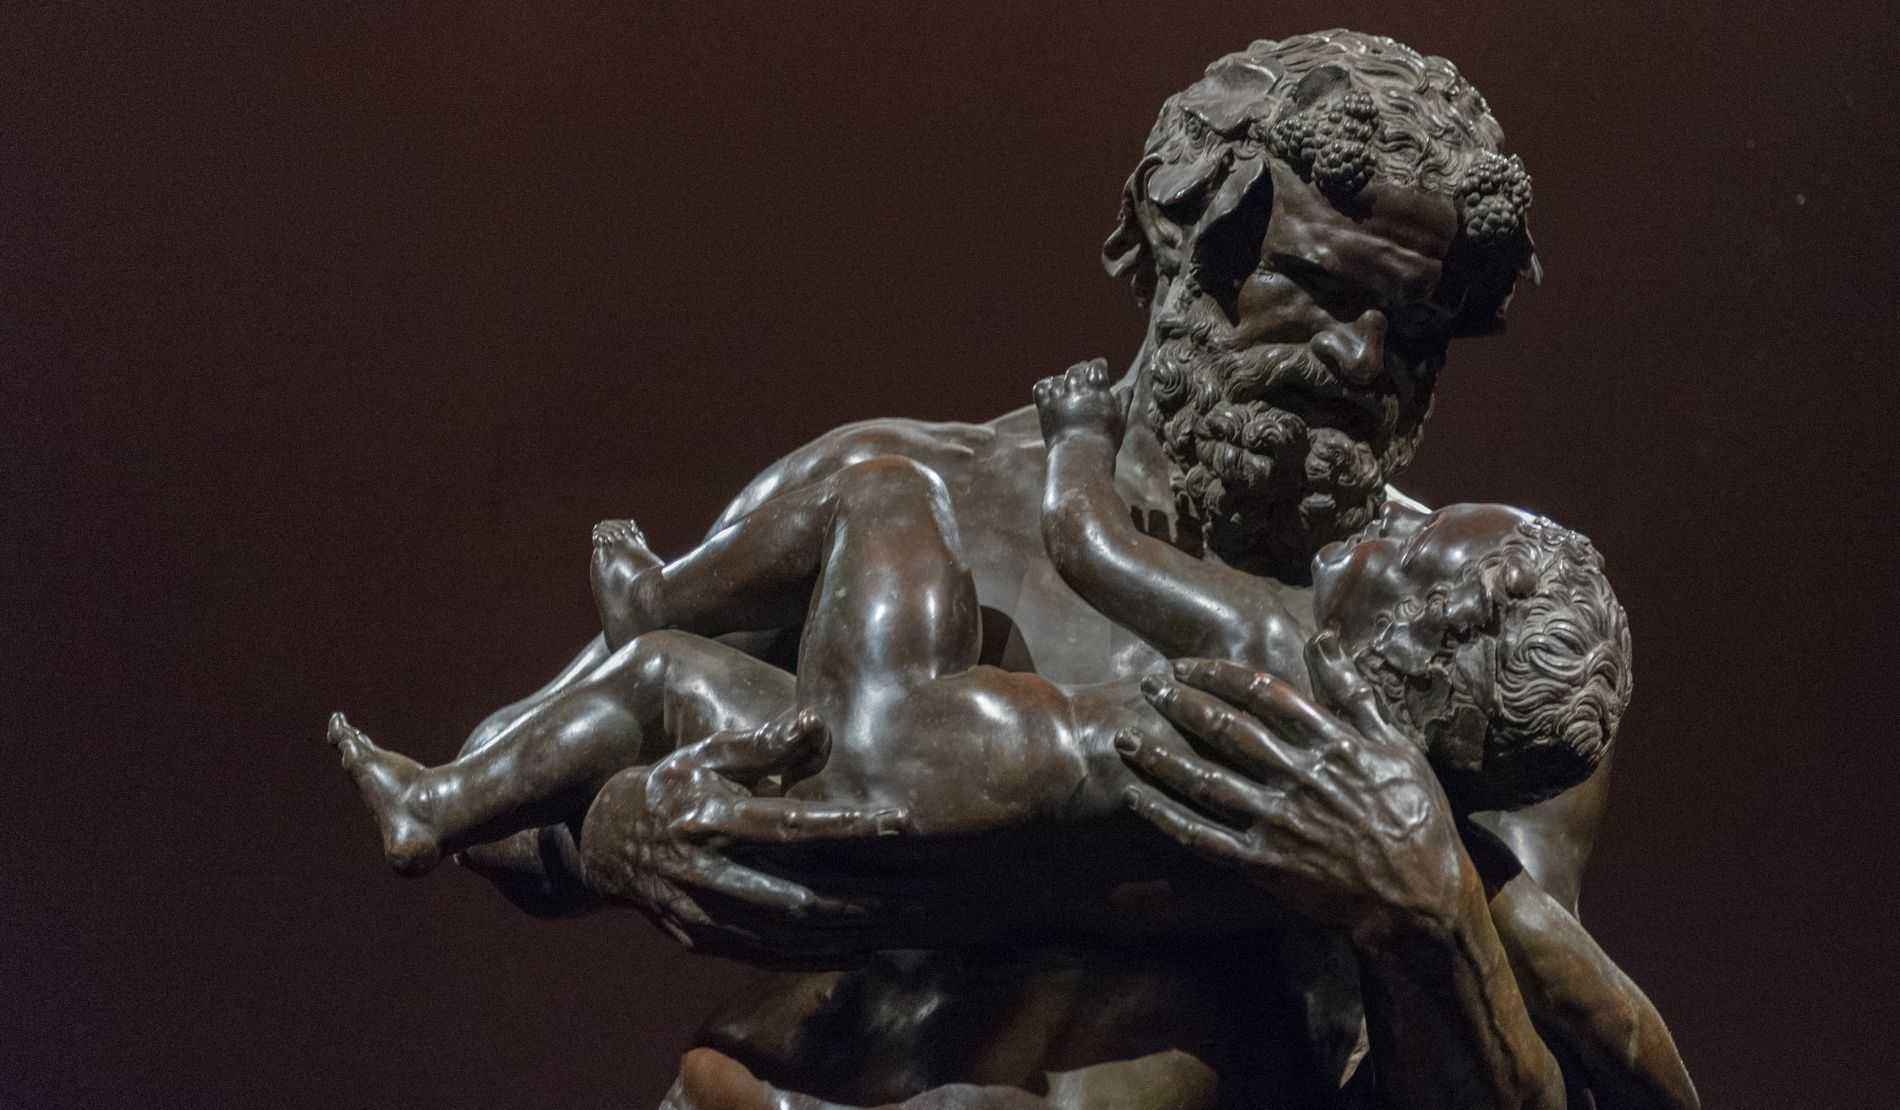 Statue of bearded man holding baby at the Uffizi Gallery in Florence